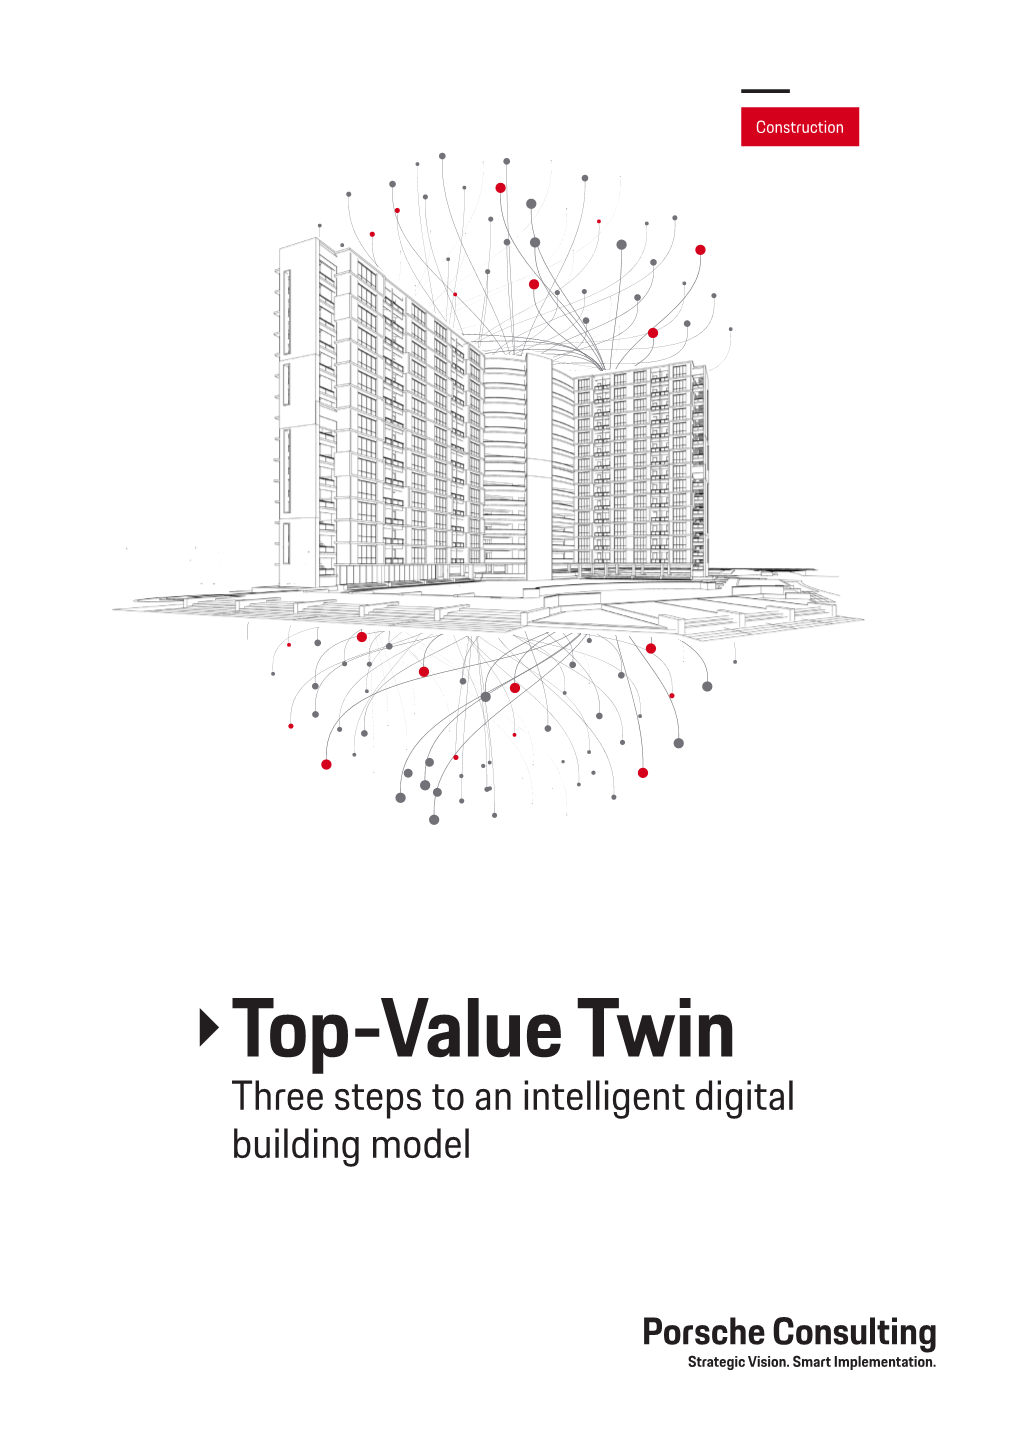 Top-Value Twin Three Steps to an Intelligent Digital Building Model Introduction the Construction Industry Has Been Booming for Years